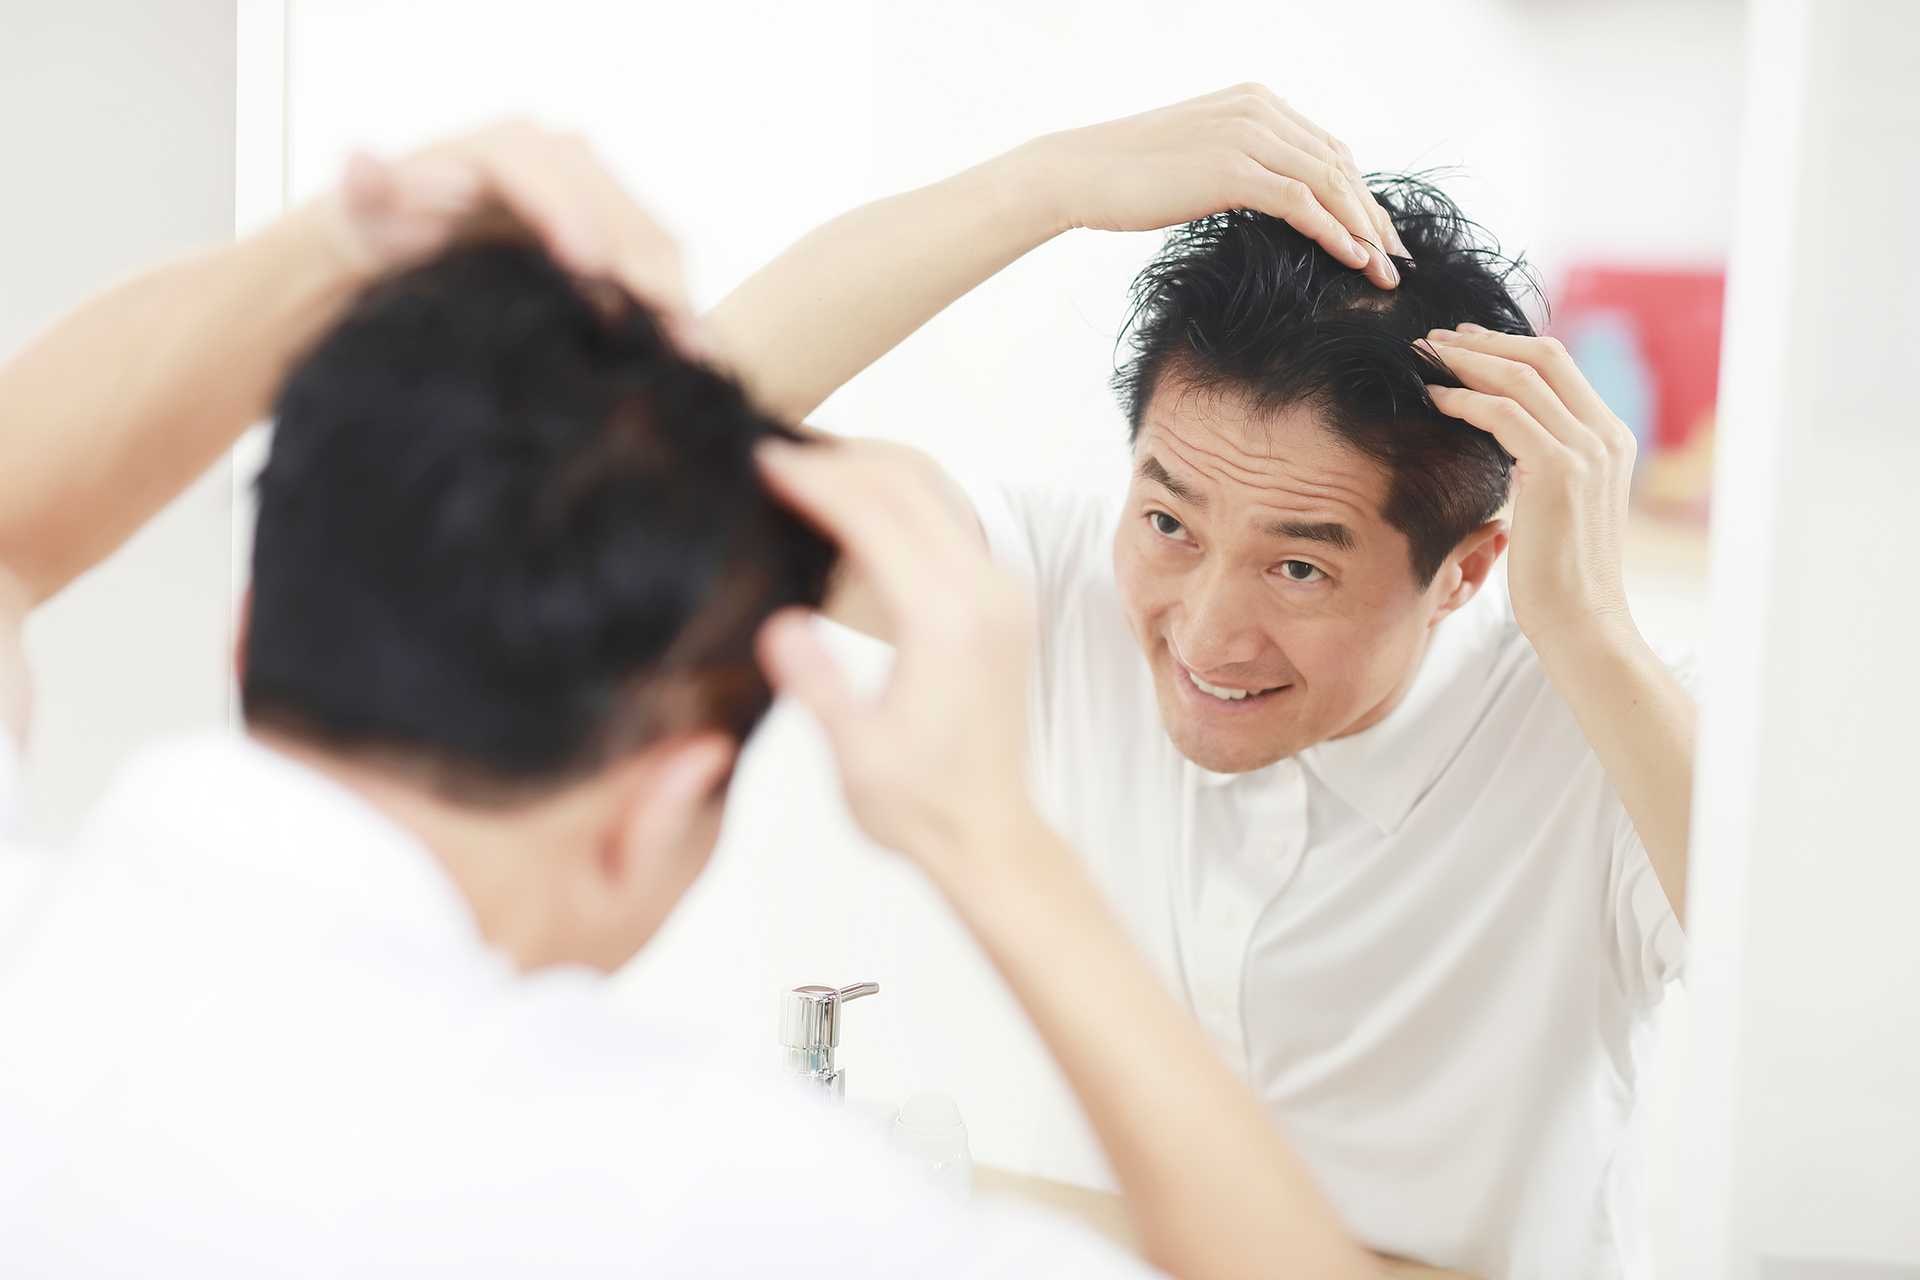 There are several causes of alopecia, however, the main one is hereditary (Archive)